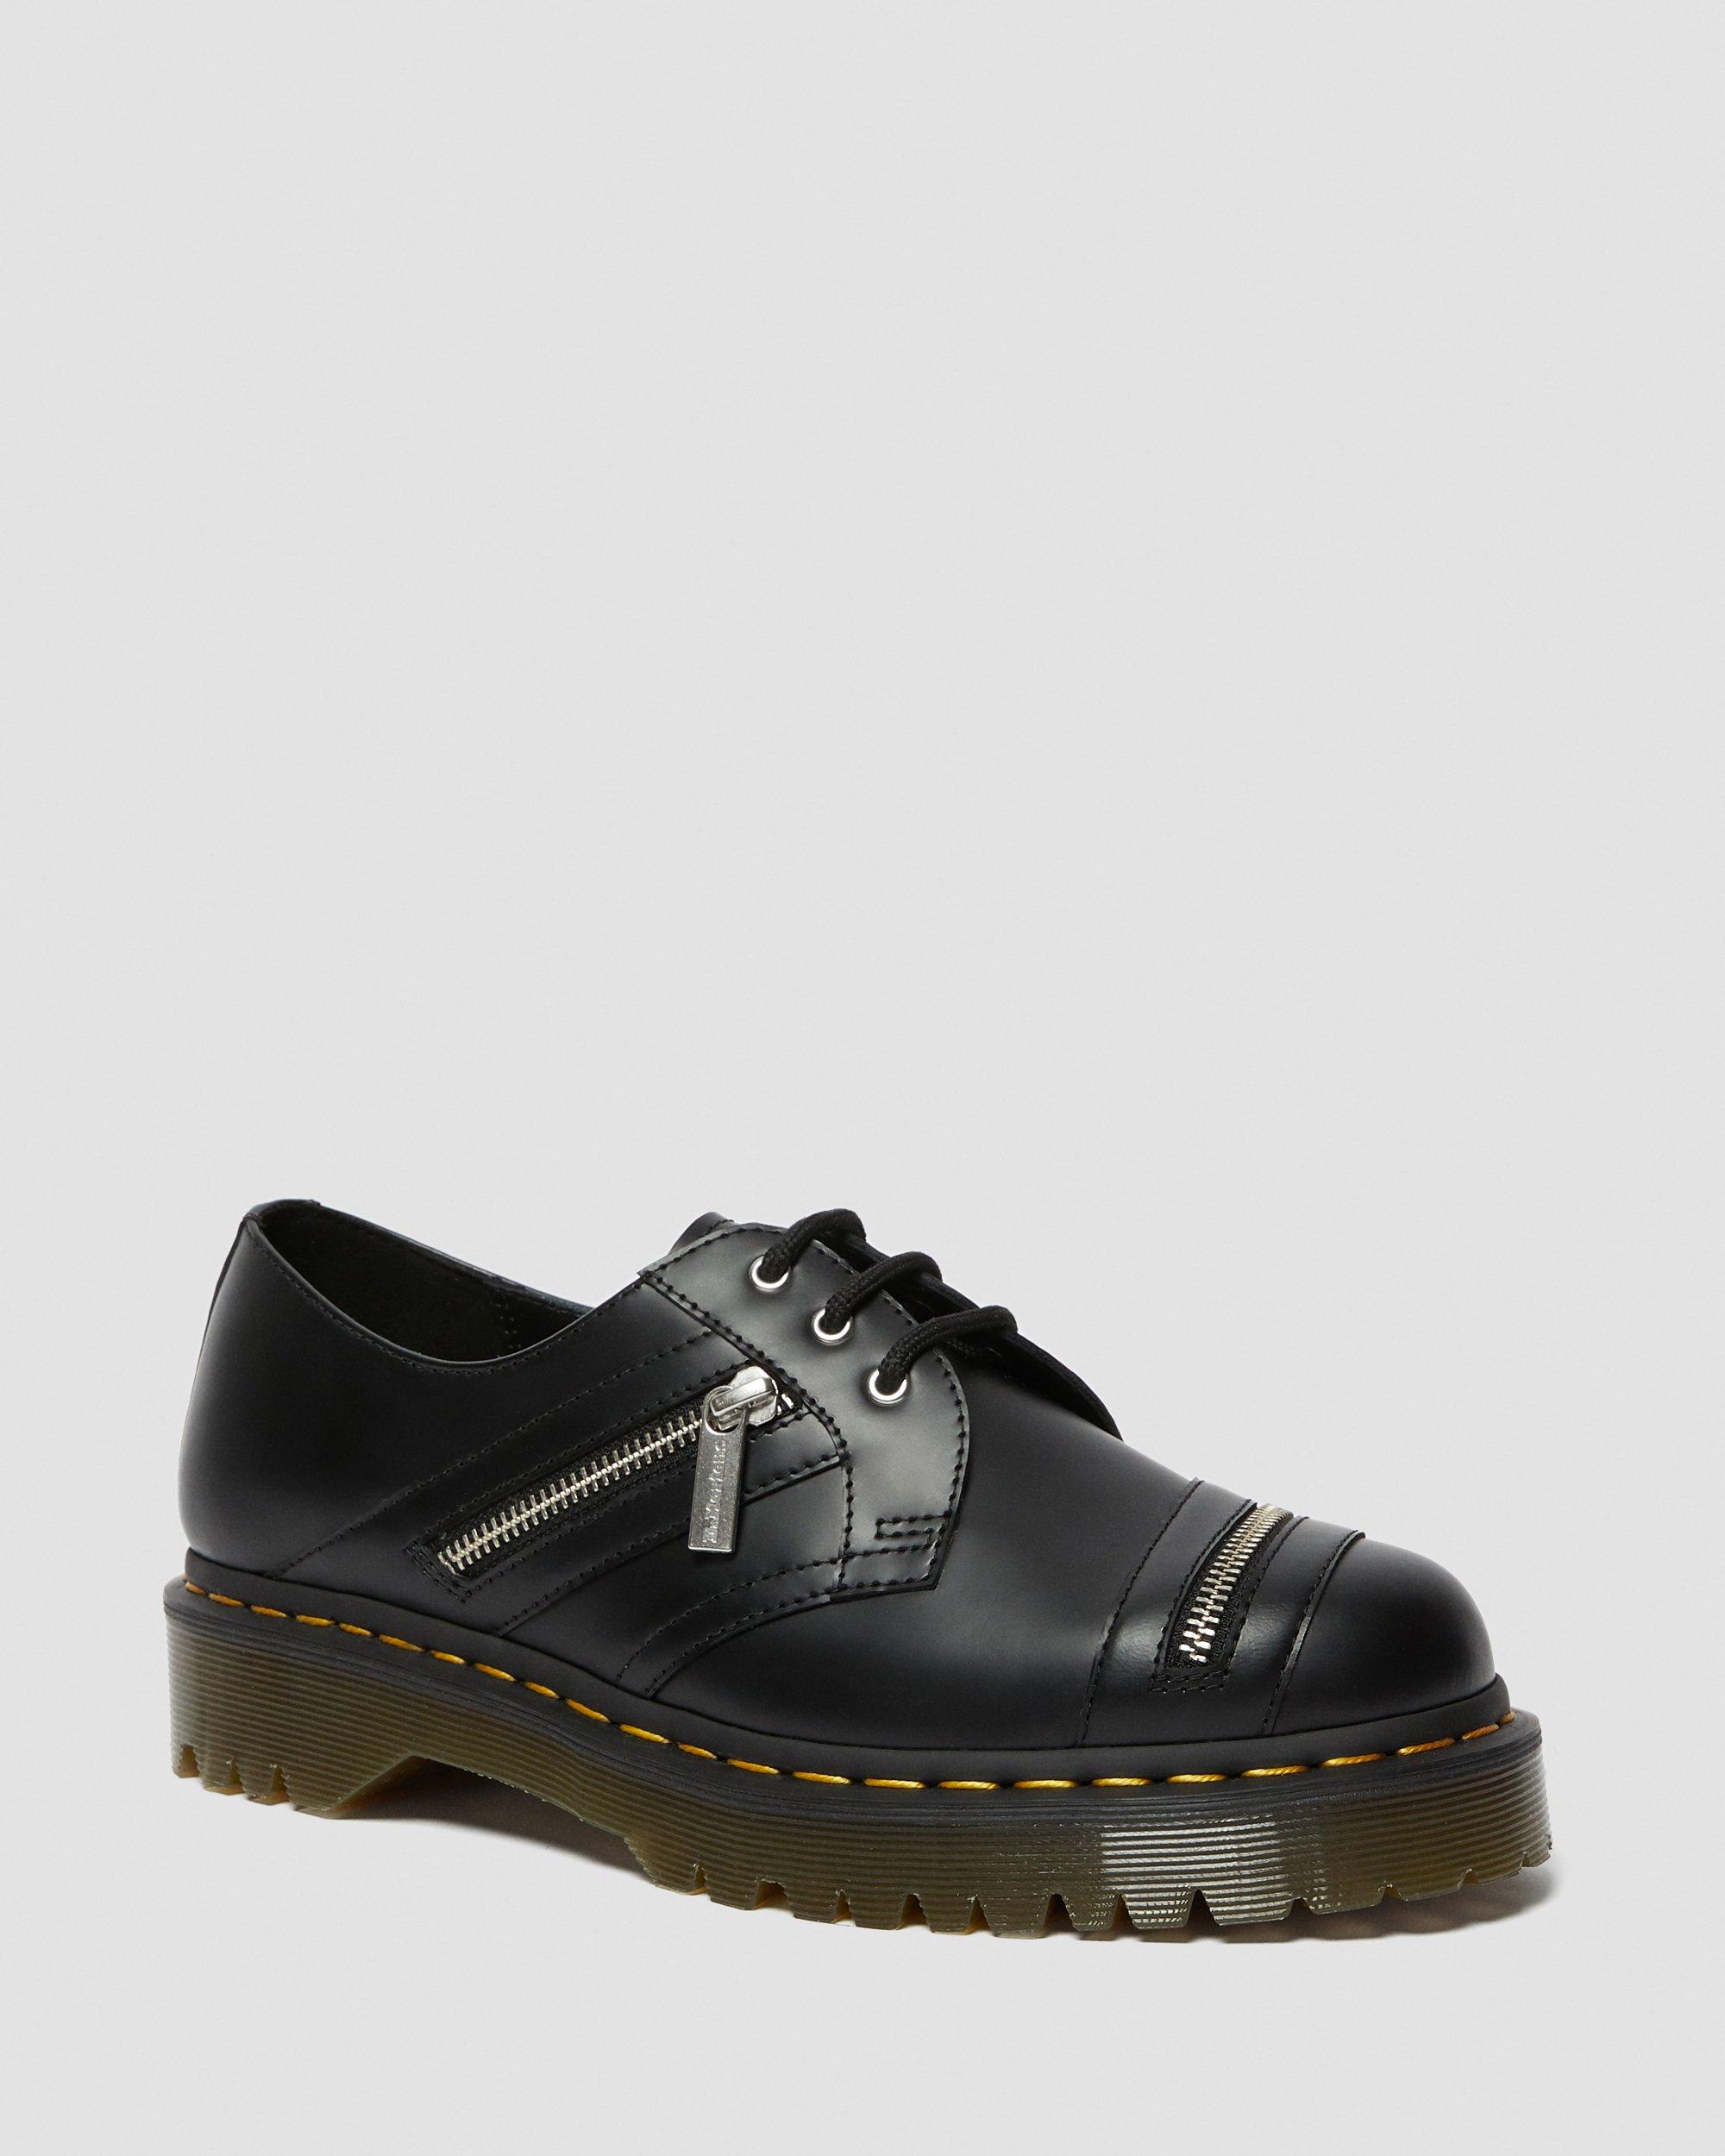 1461 Bex Zip Leather Shoes in Black | Dr. Martens